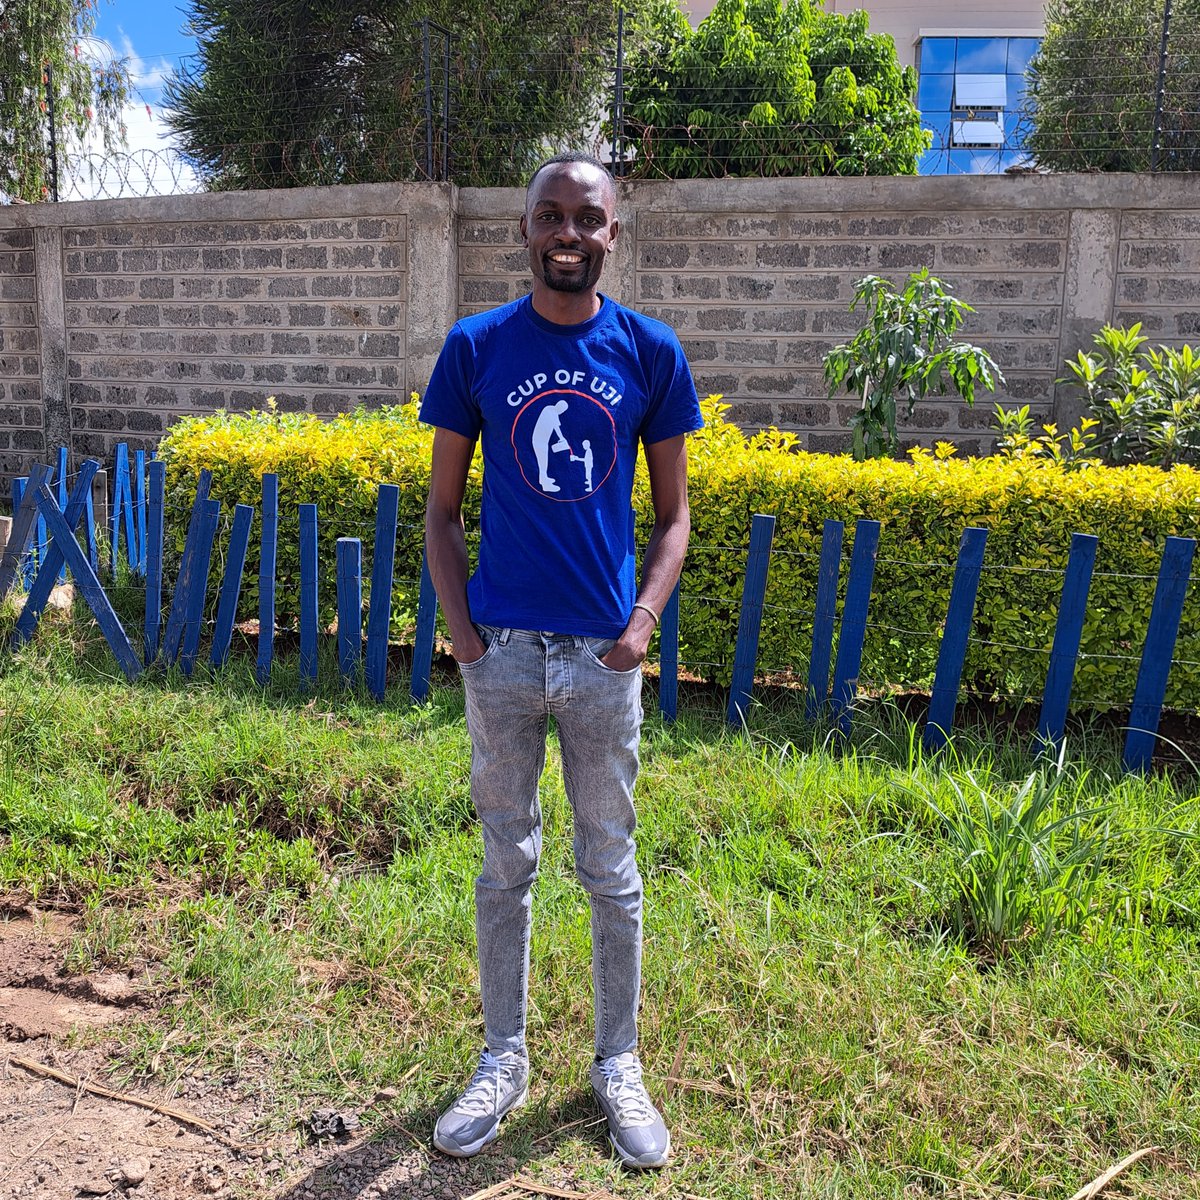 Monday blues for who? 😊 From a #Rotary engagement in #Arusha , #Tanzania 🇹🇿,  to a @CupofUjiKenya engagement in #Nairobi, #Kenya 🇰🇪 on a Monday morning. 100,000 school children need to be fed daily by the end of 2024...

cupofuji.org 

#CupOfUji #PartnershipsForGood…